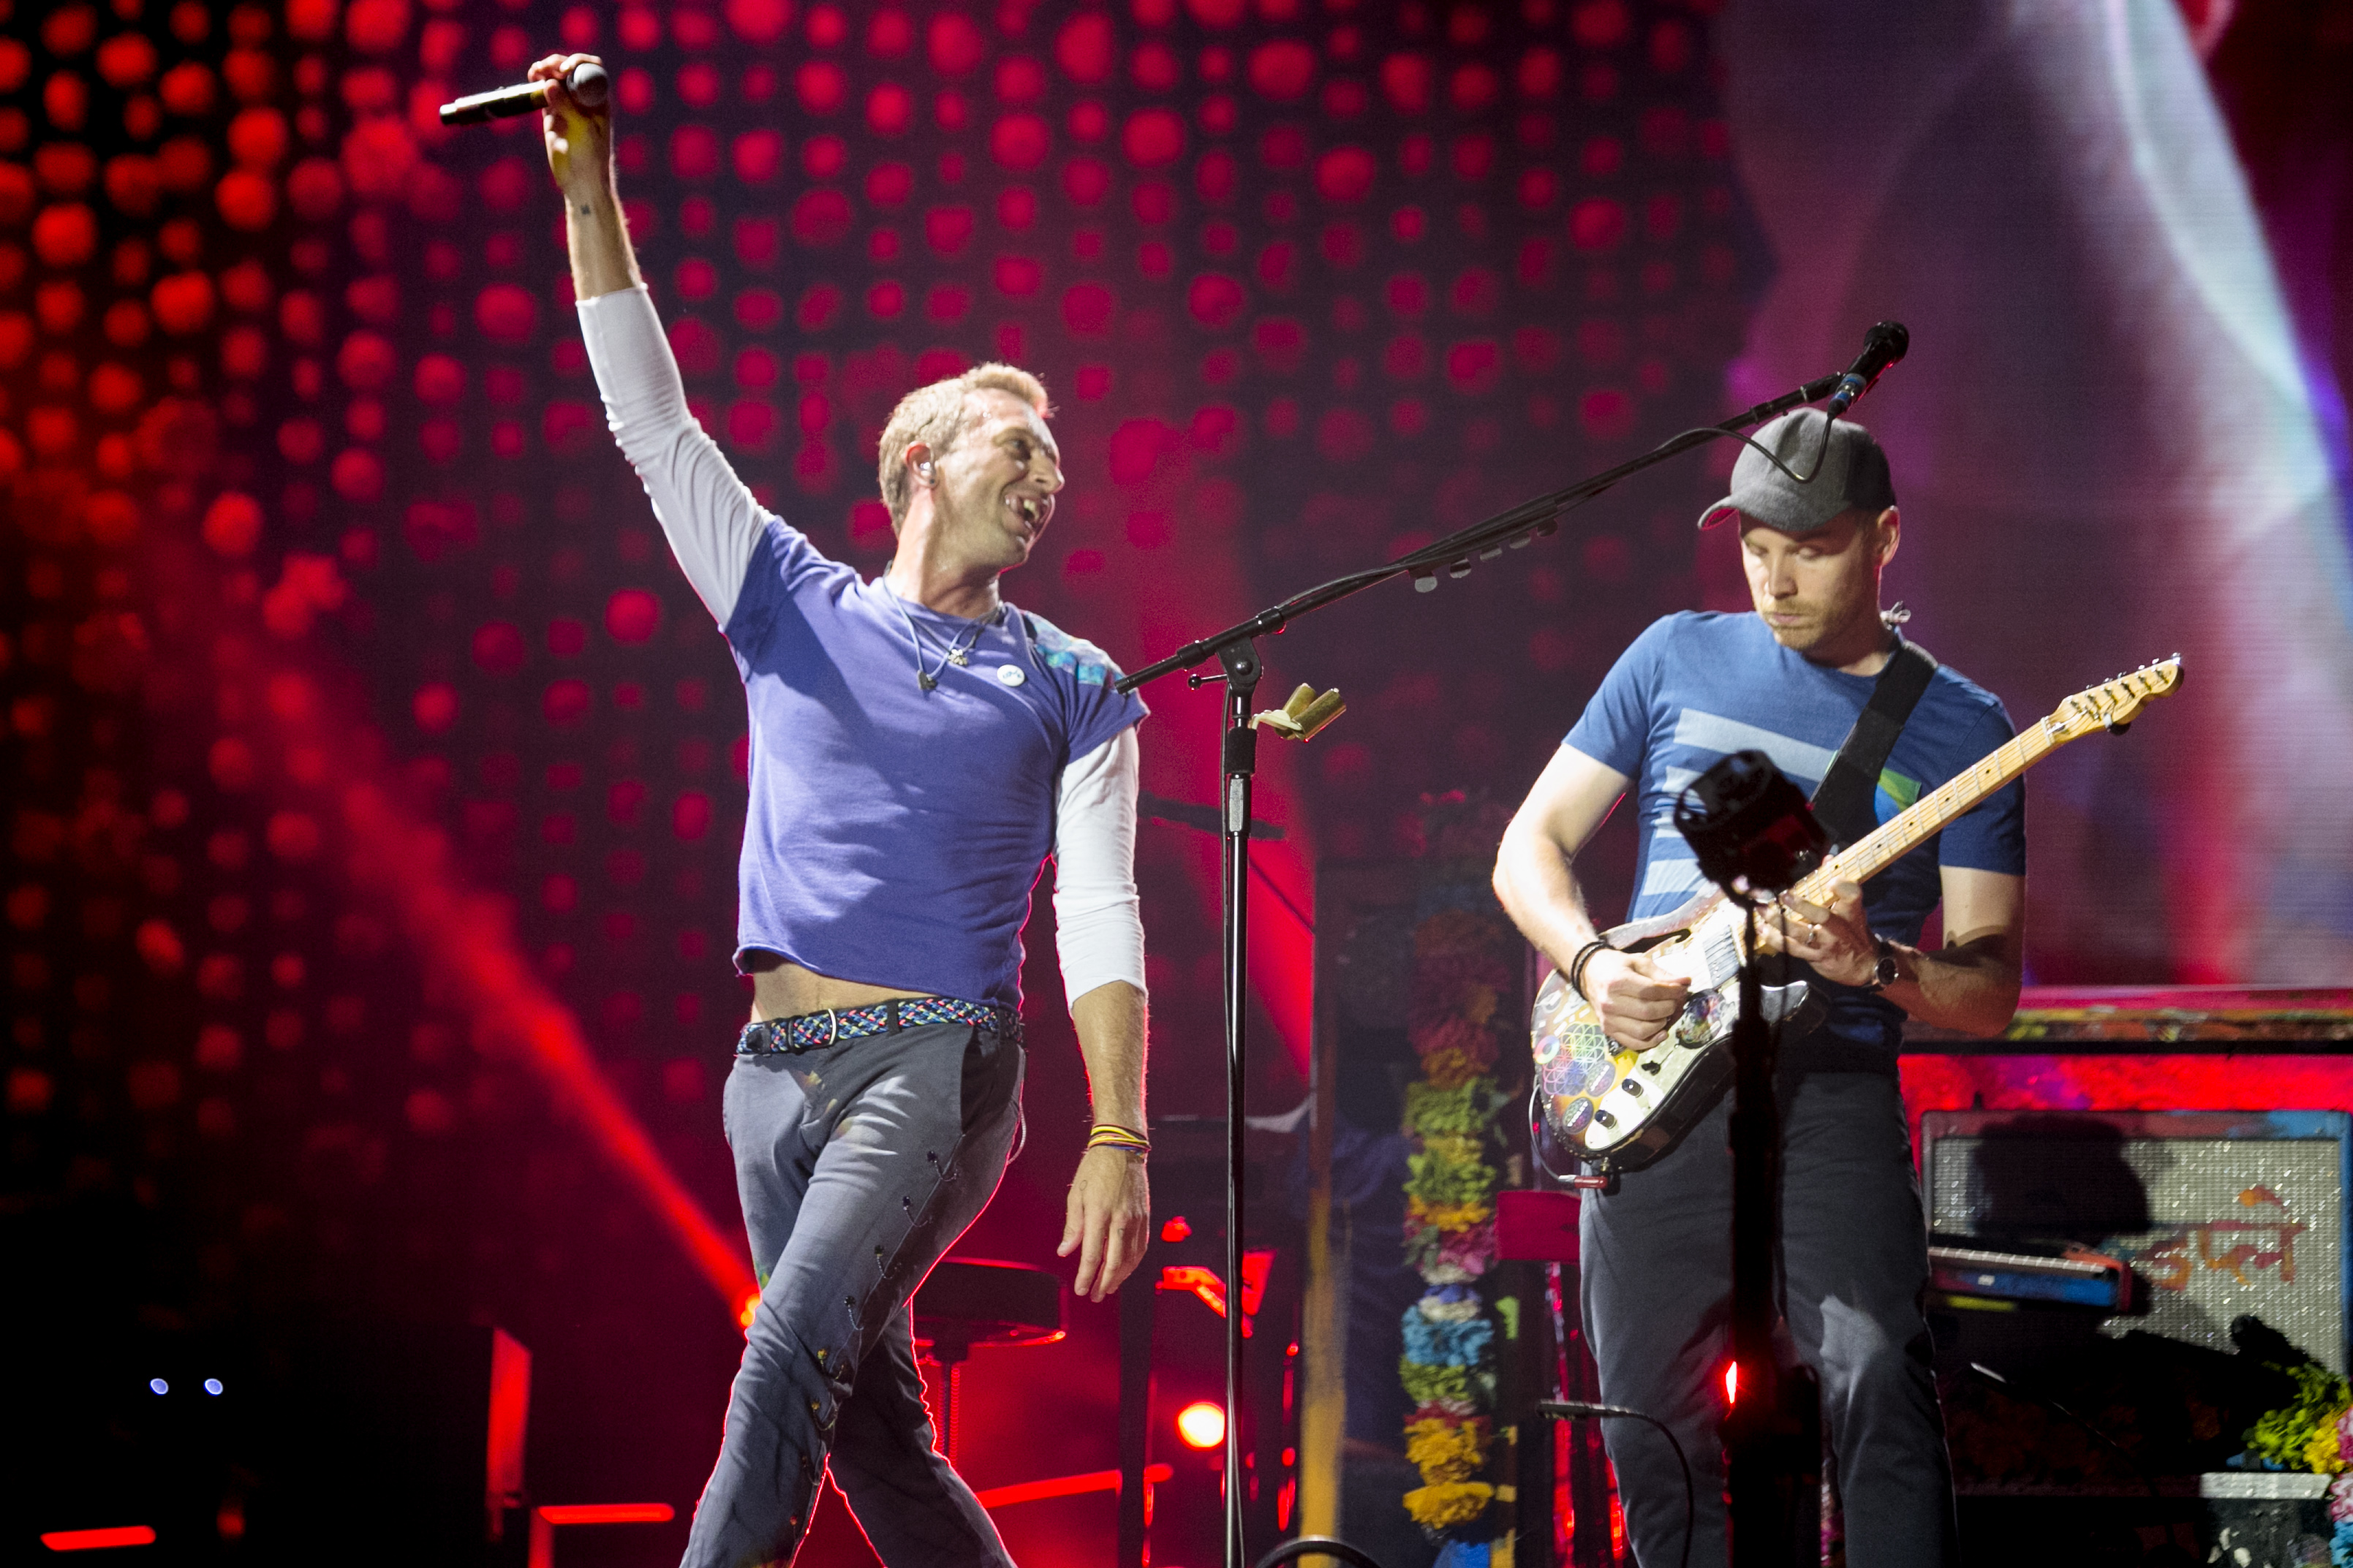 Coldplay concert tickets: Where to buy, prices, 2022 tour schedule